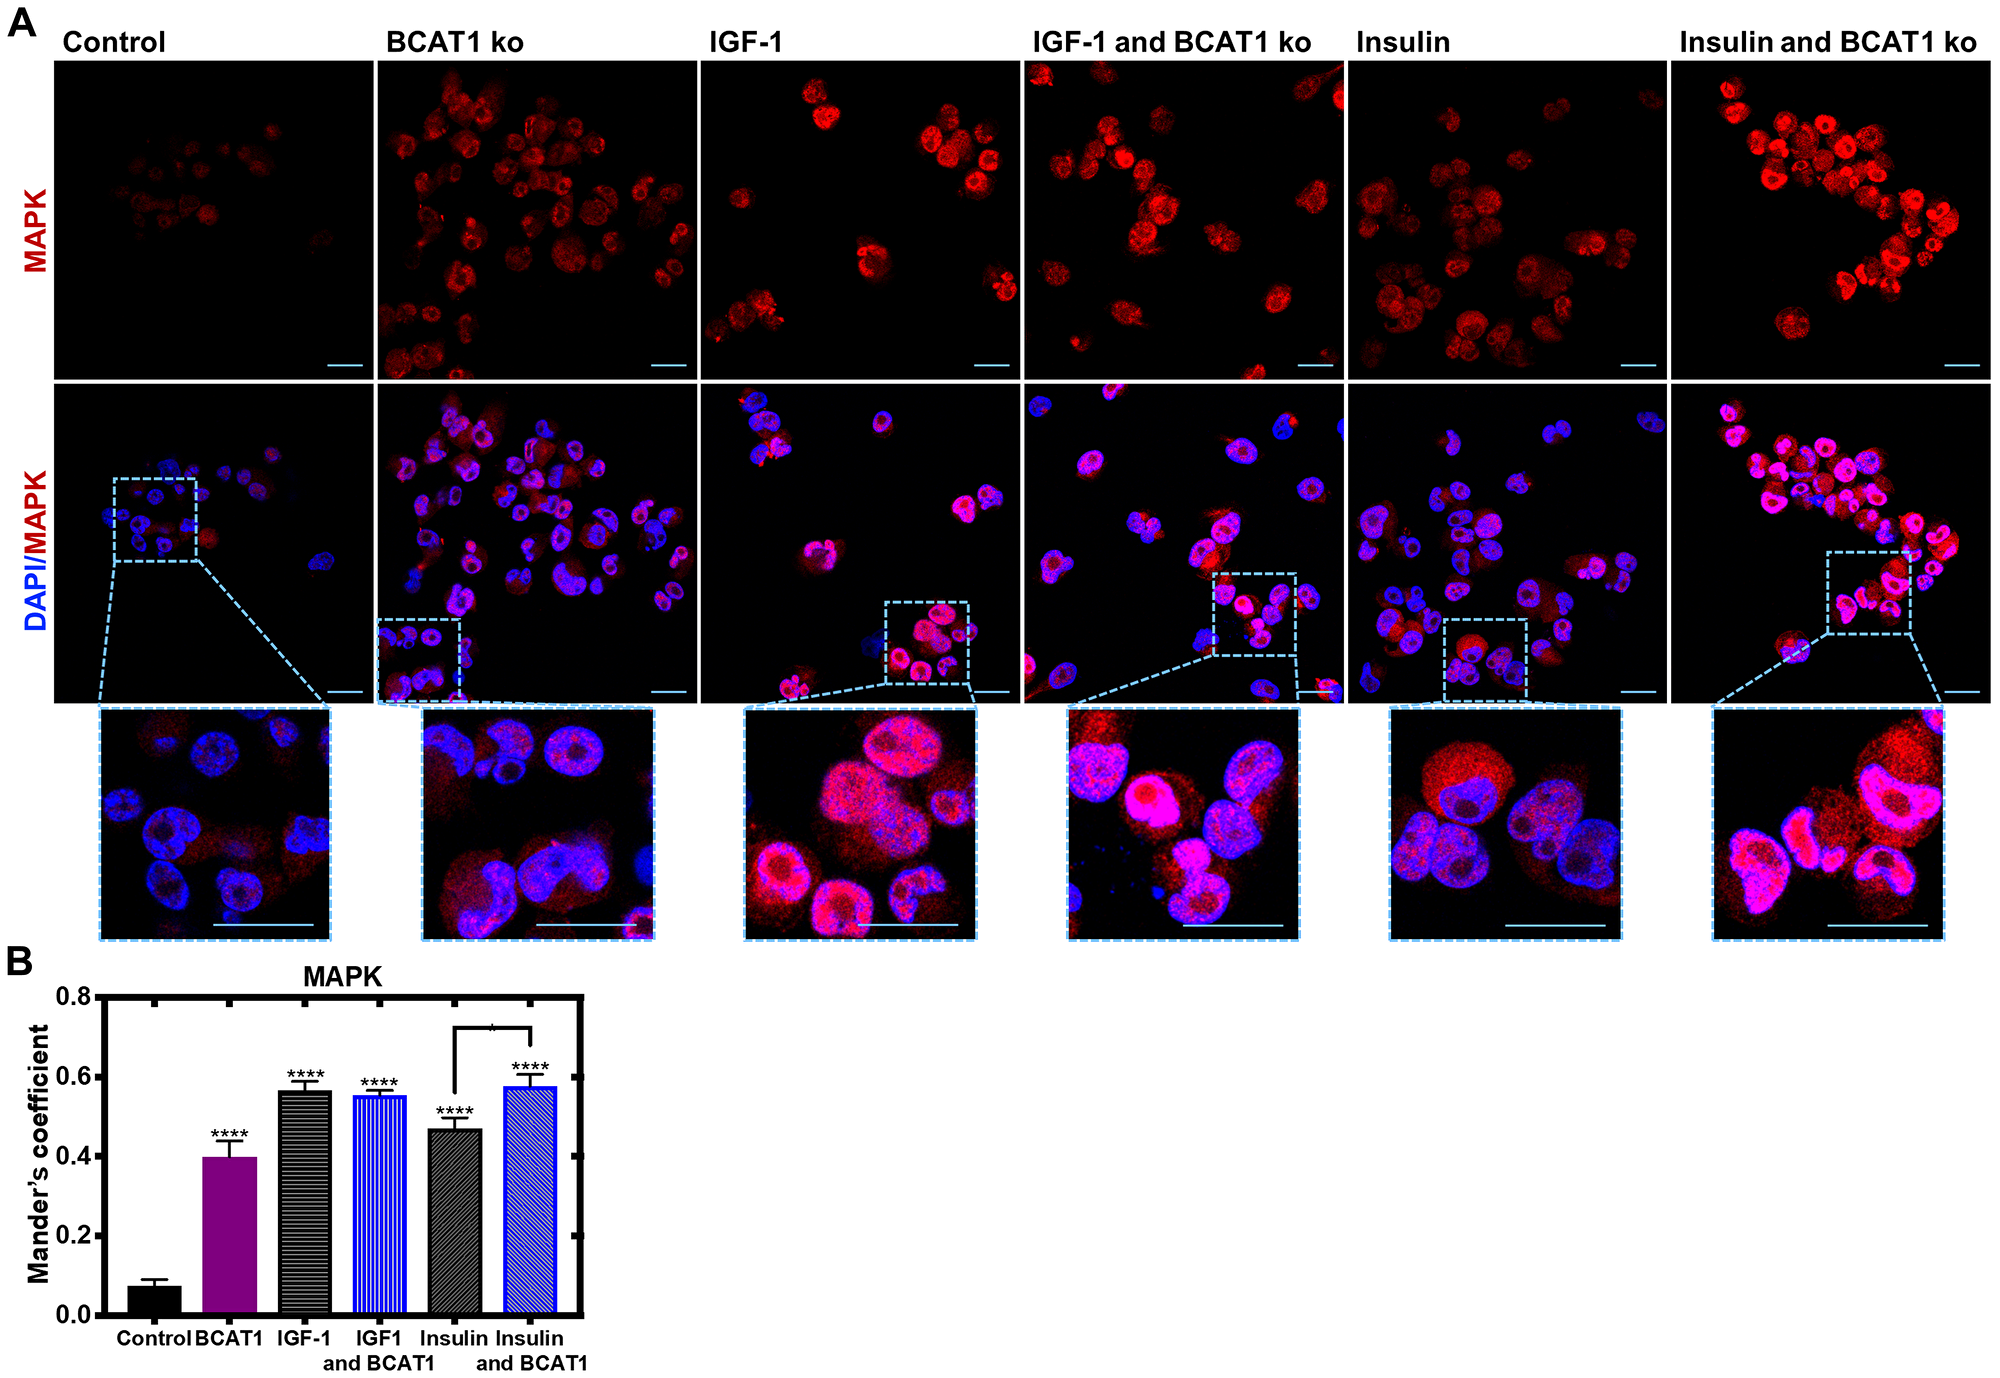 Insulin-mediated nuclear translocation of MAPK is significantly increased with BCAT1 knockdown in MDA-MB-231 cells.